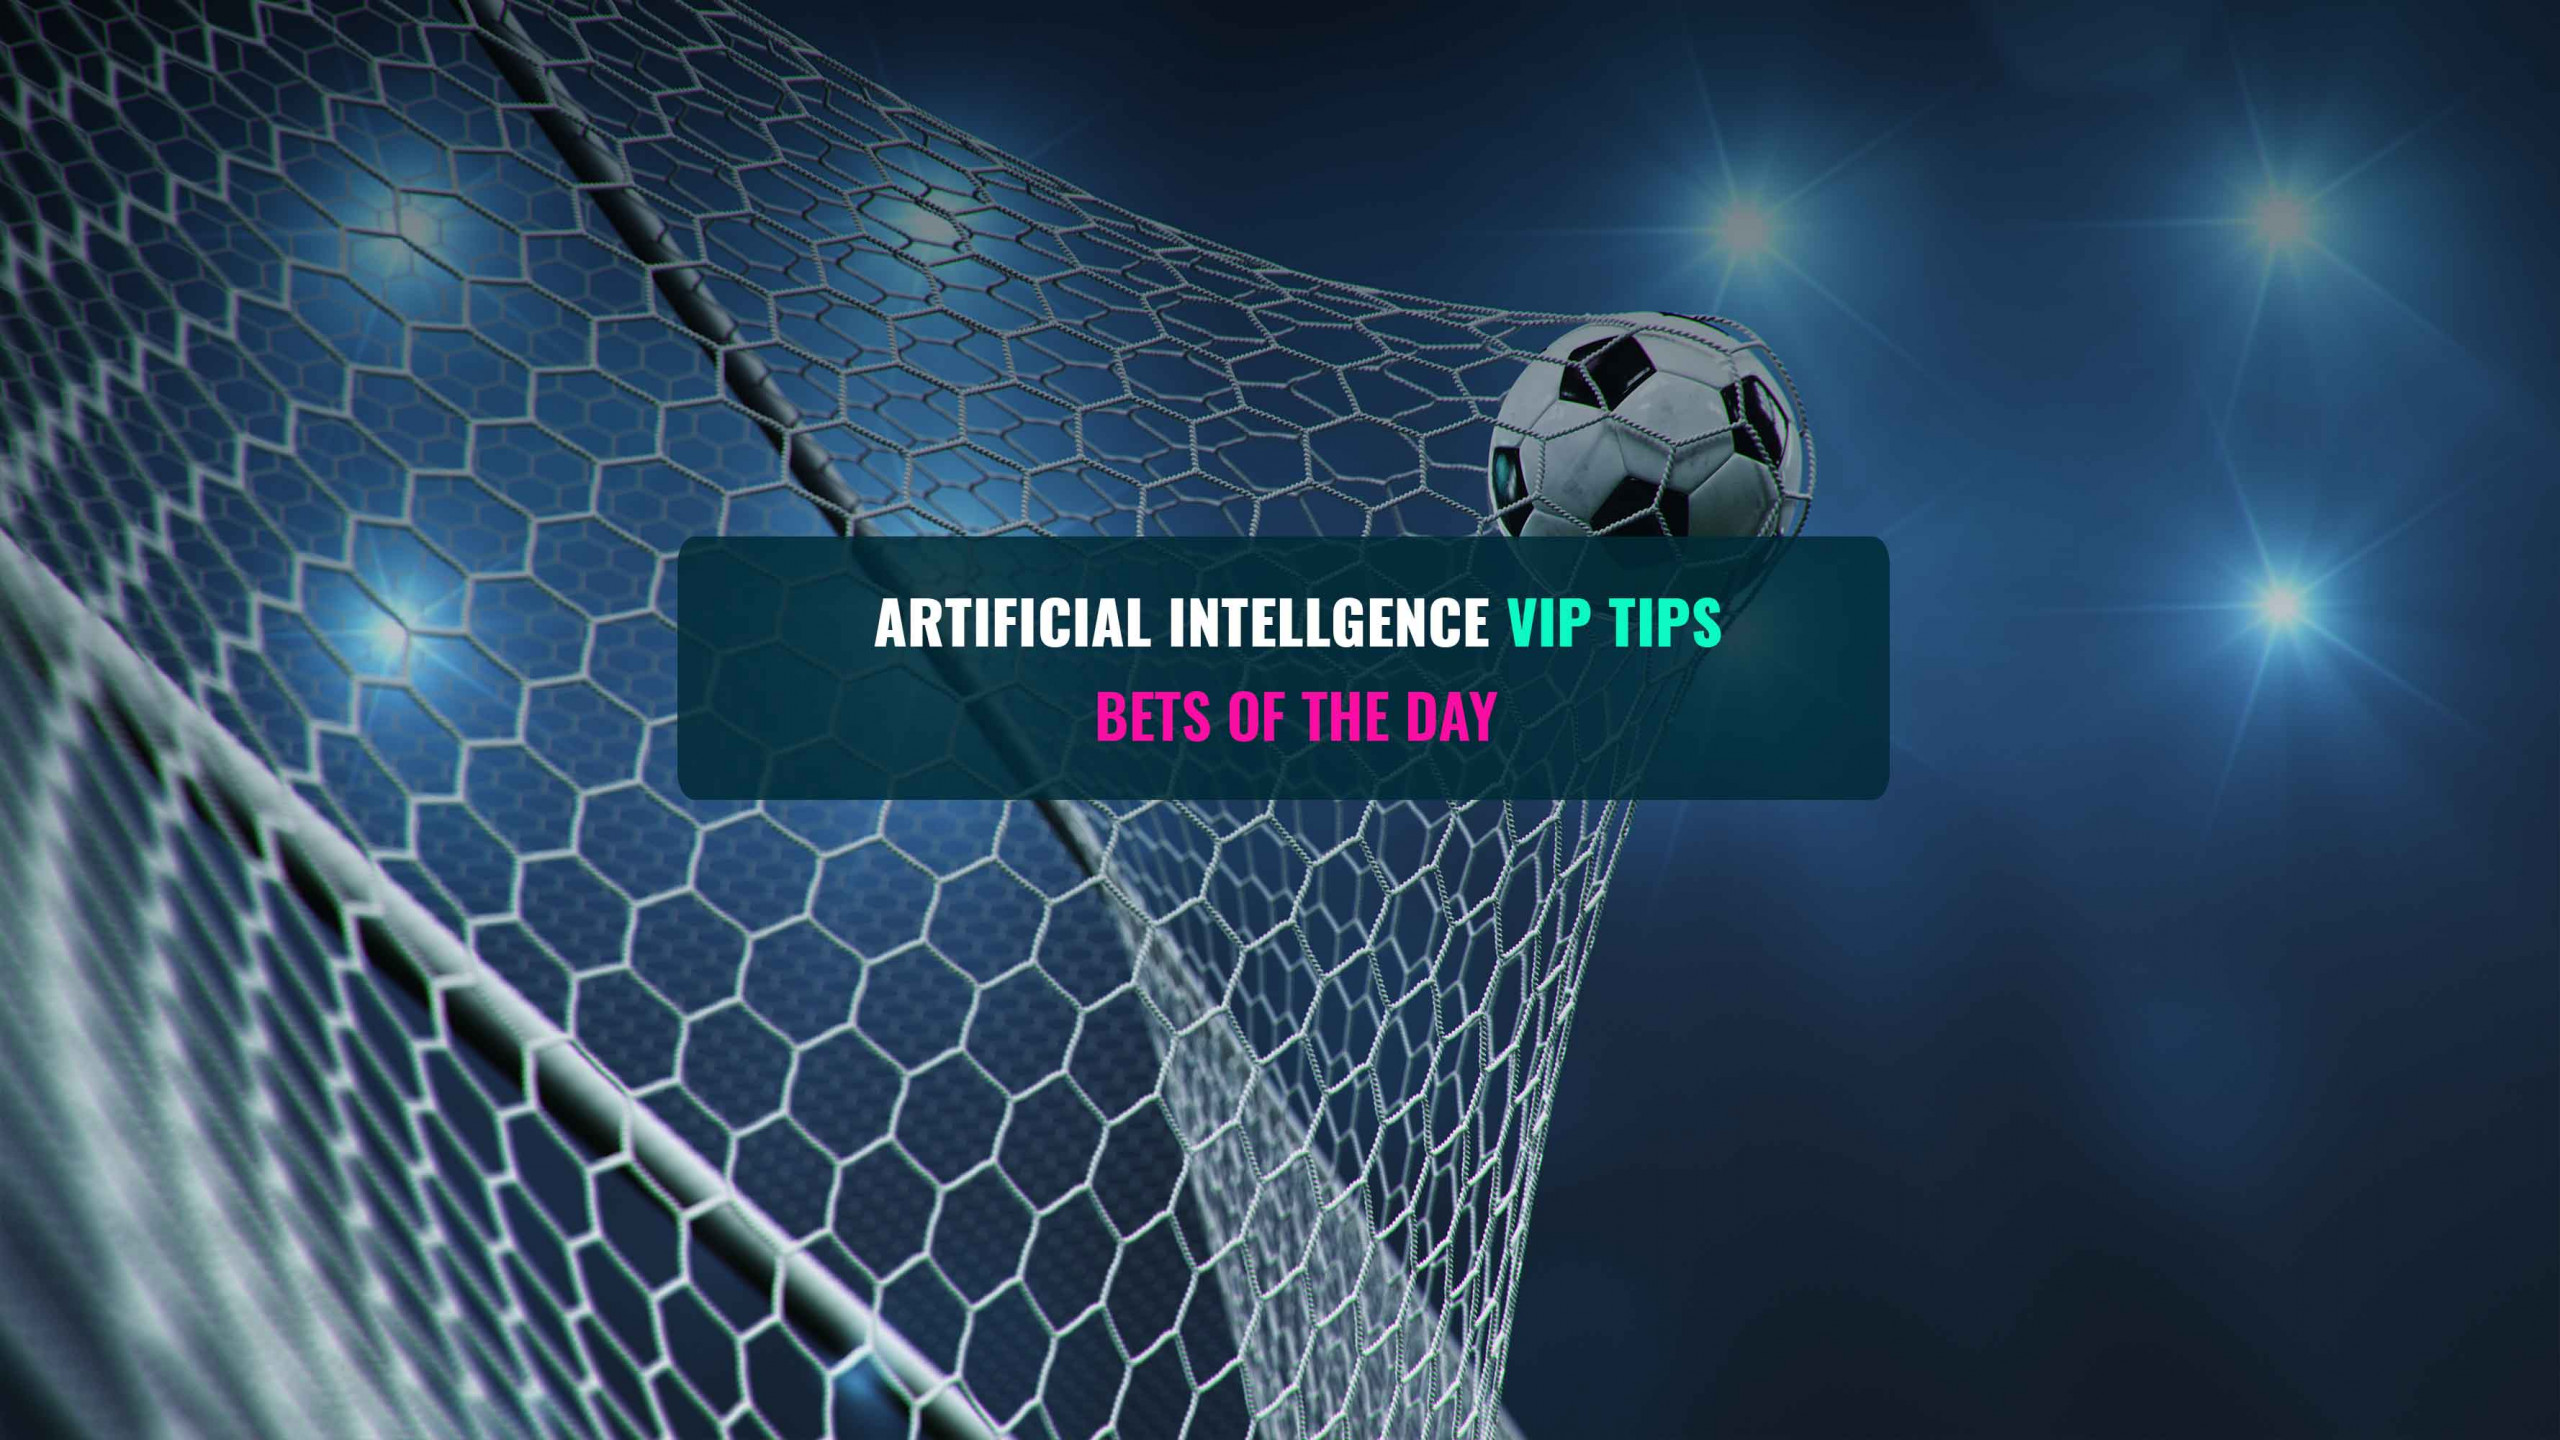 ✔️ Artificial Intelligence soccer tips ✔️ Goaliero.com - Machine Learning Football Tips - Bets of the day ✔️